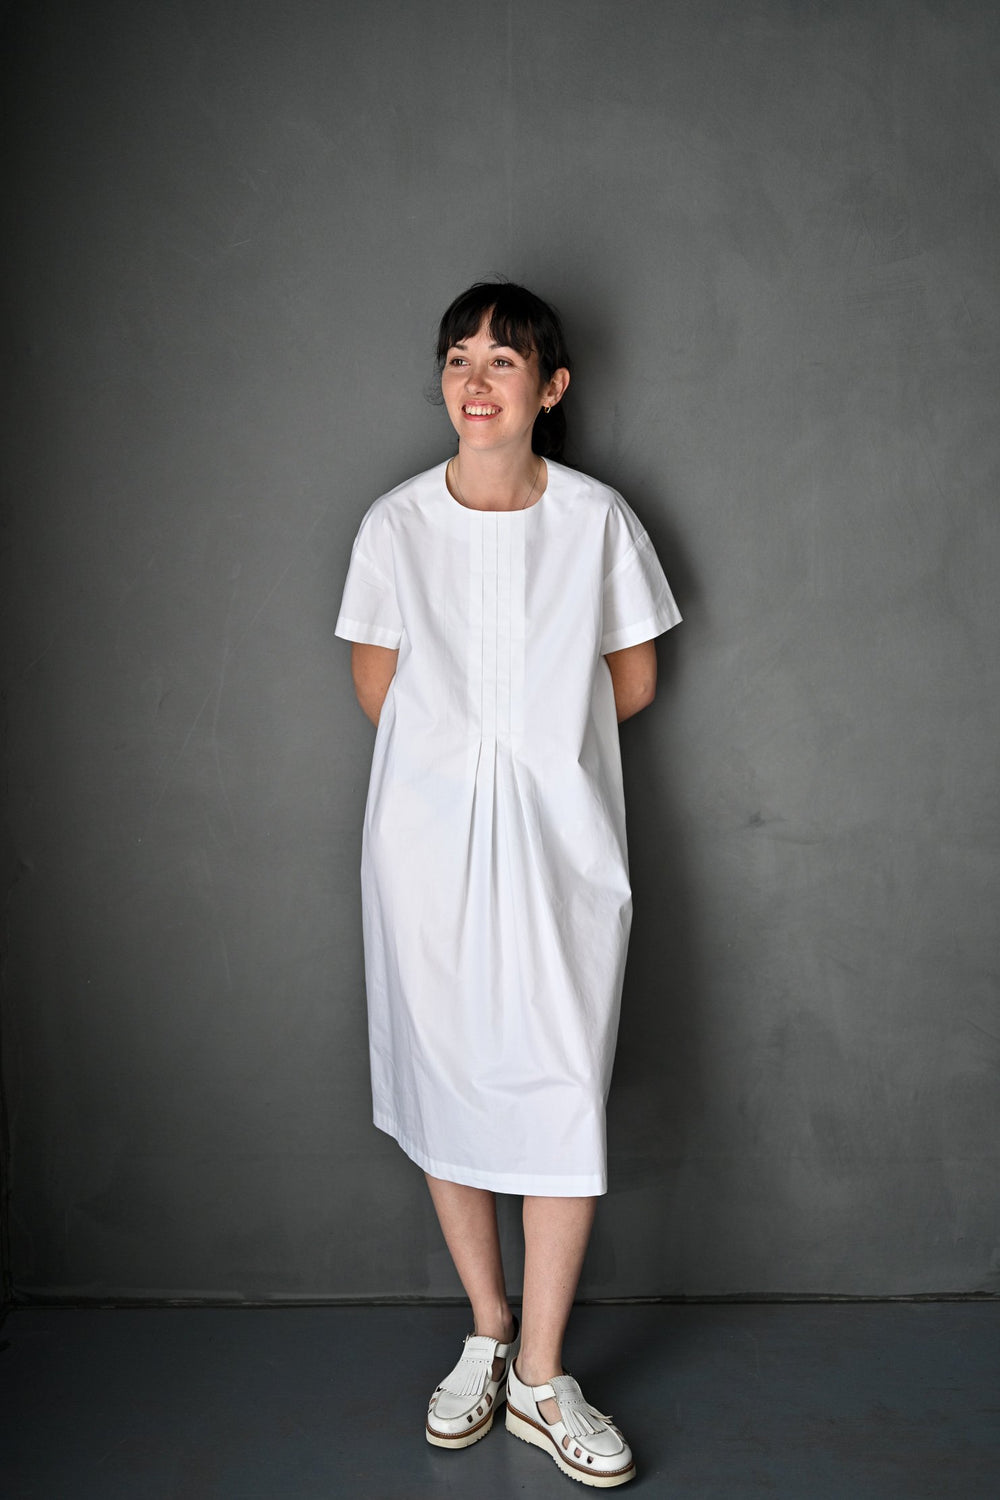 Woman wearing the Box Box Top and Dress sewing pattern by Merchant and Mills. A boxy dress pattern made in poplin, chambray, denims or lightweight wool fabric featuring a front pleat detail, rouleaux loop back neck closure, round neck and short sleeves.